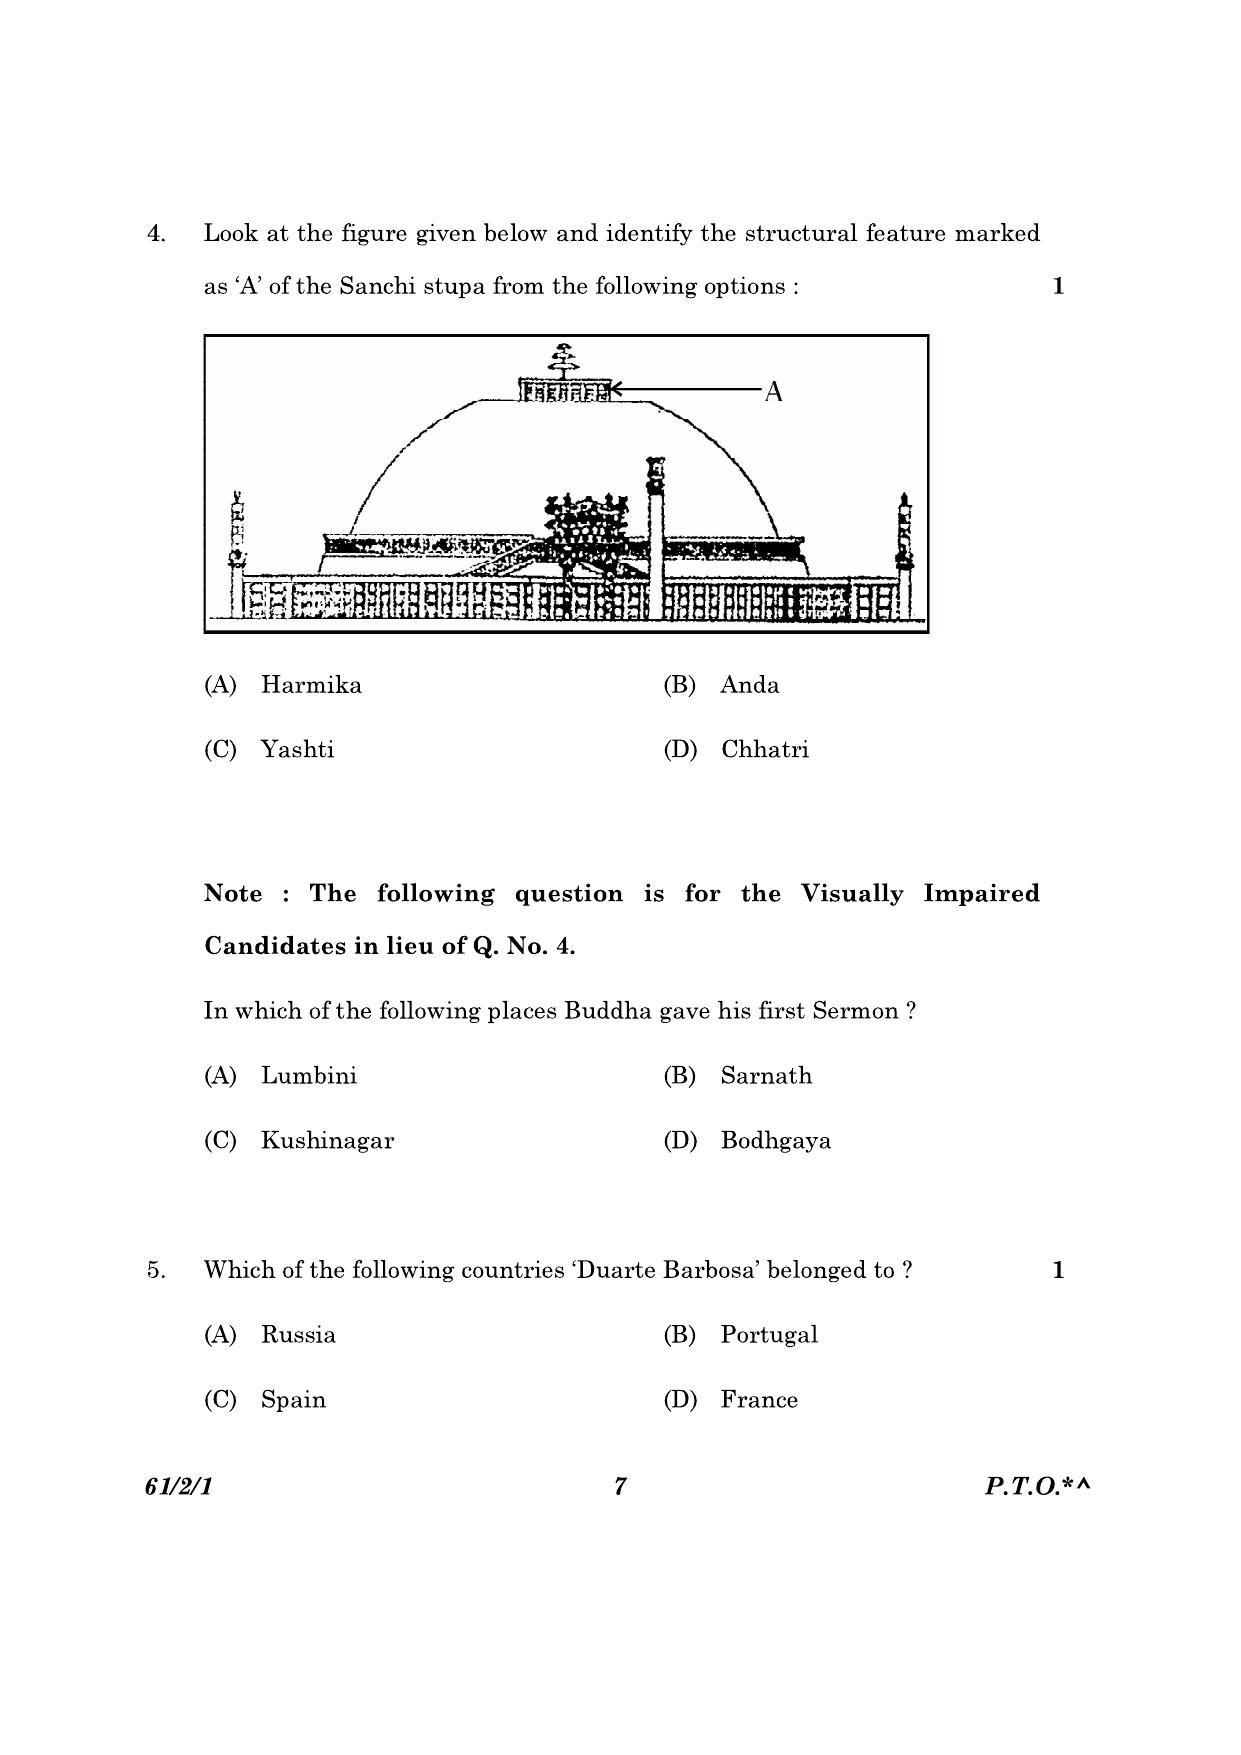 CBSE Class 12 61-2-1 History 2023 Question Paper - Page 7